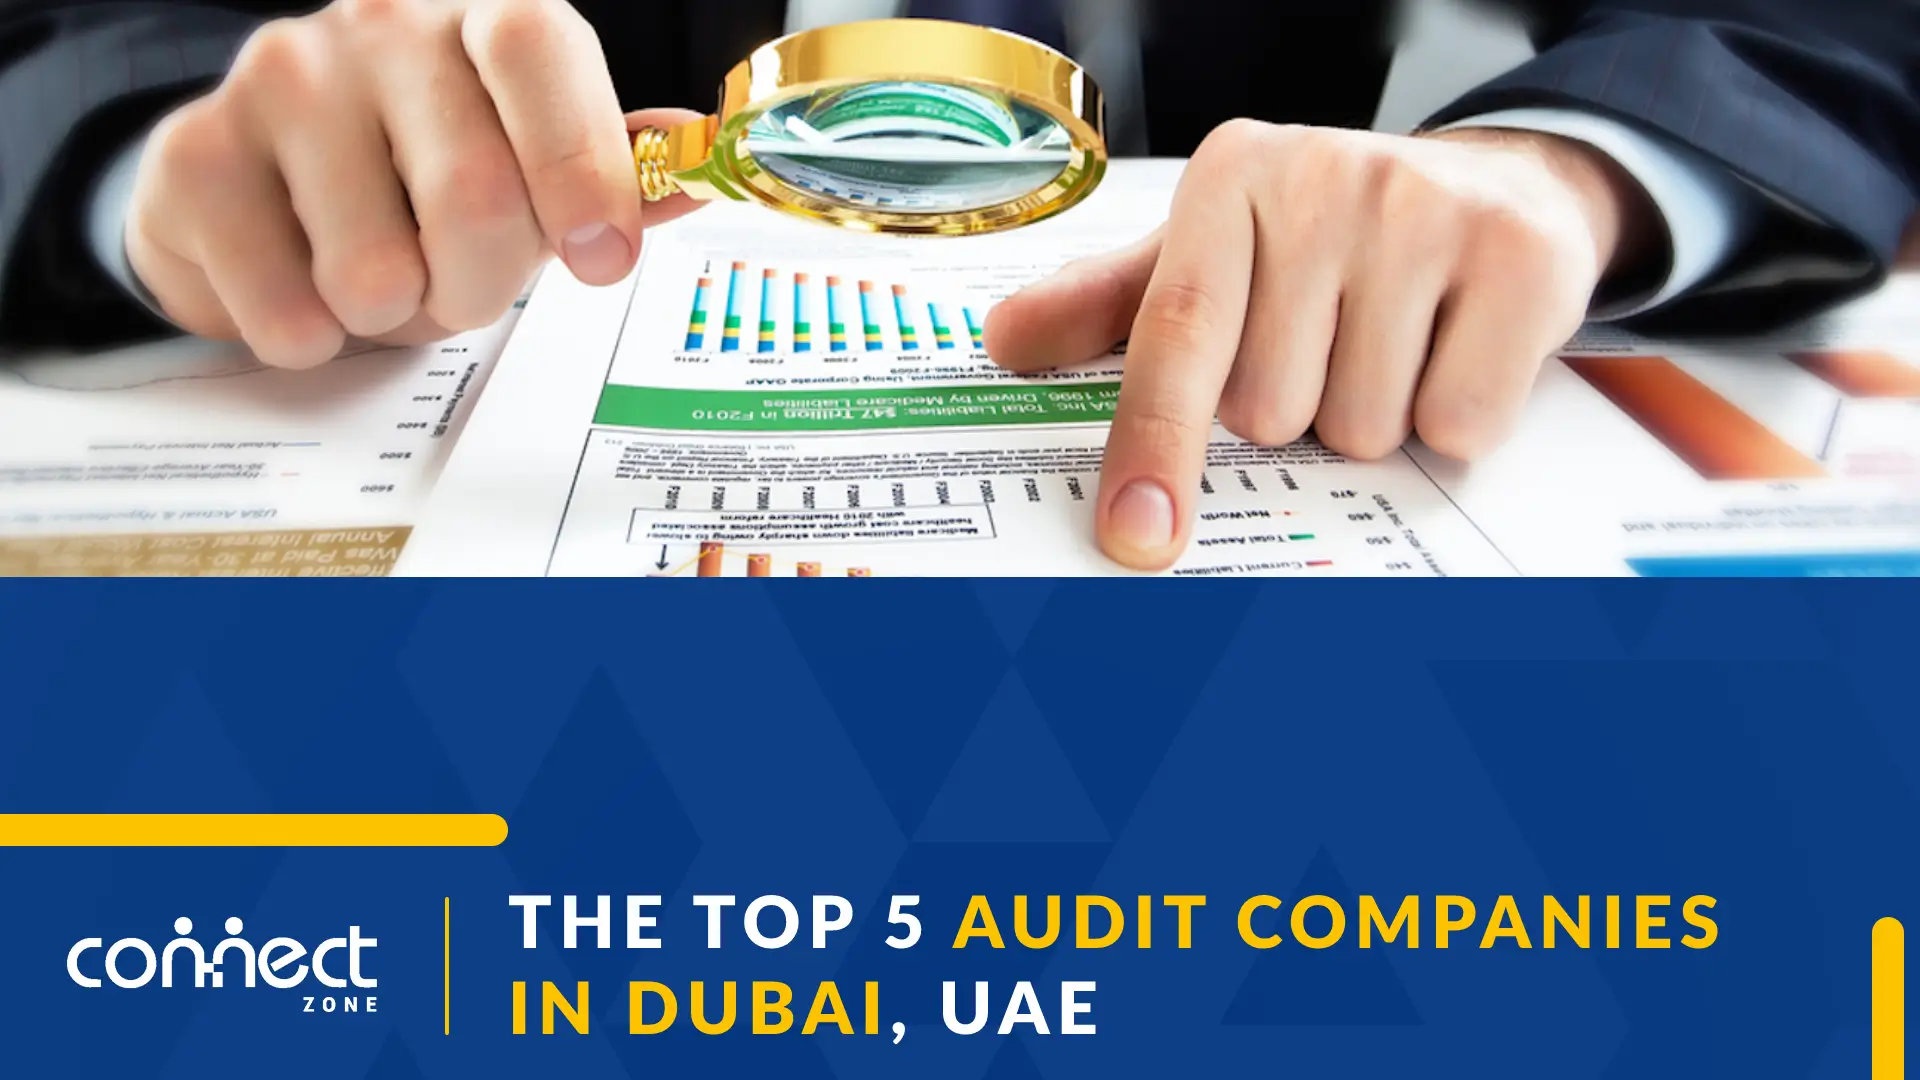 The Top 5 Audit Companies